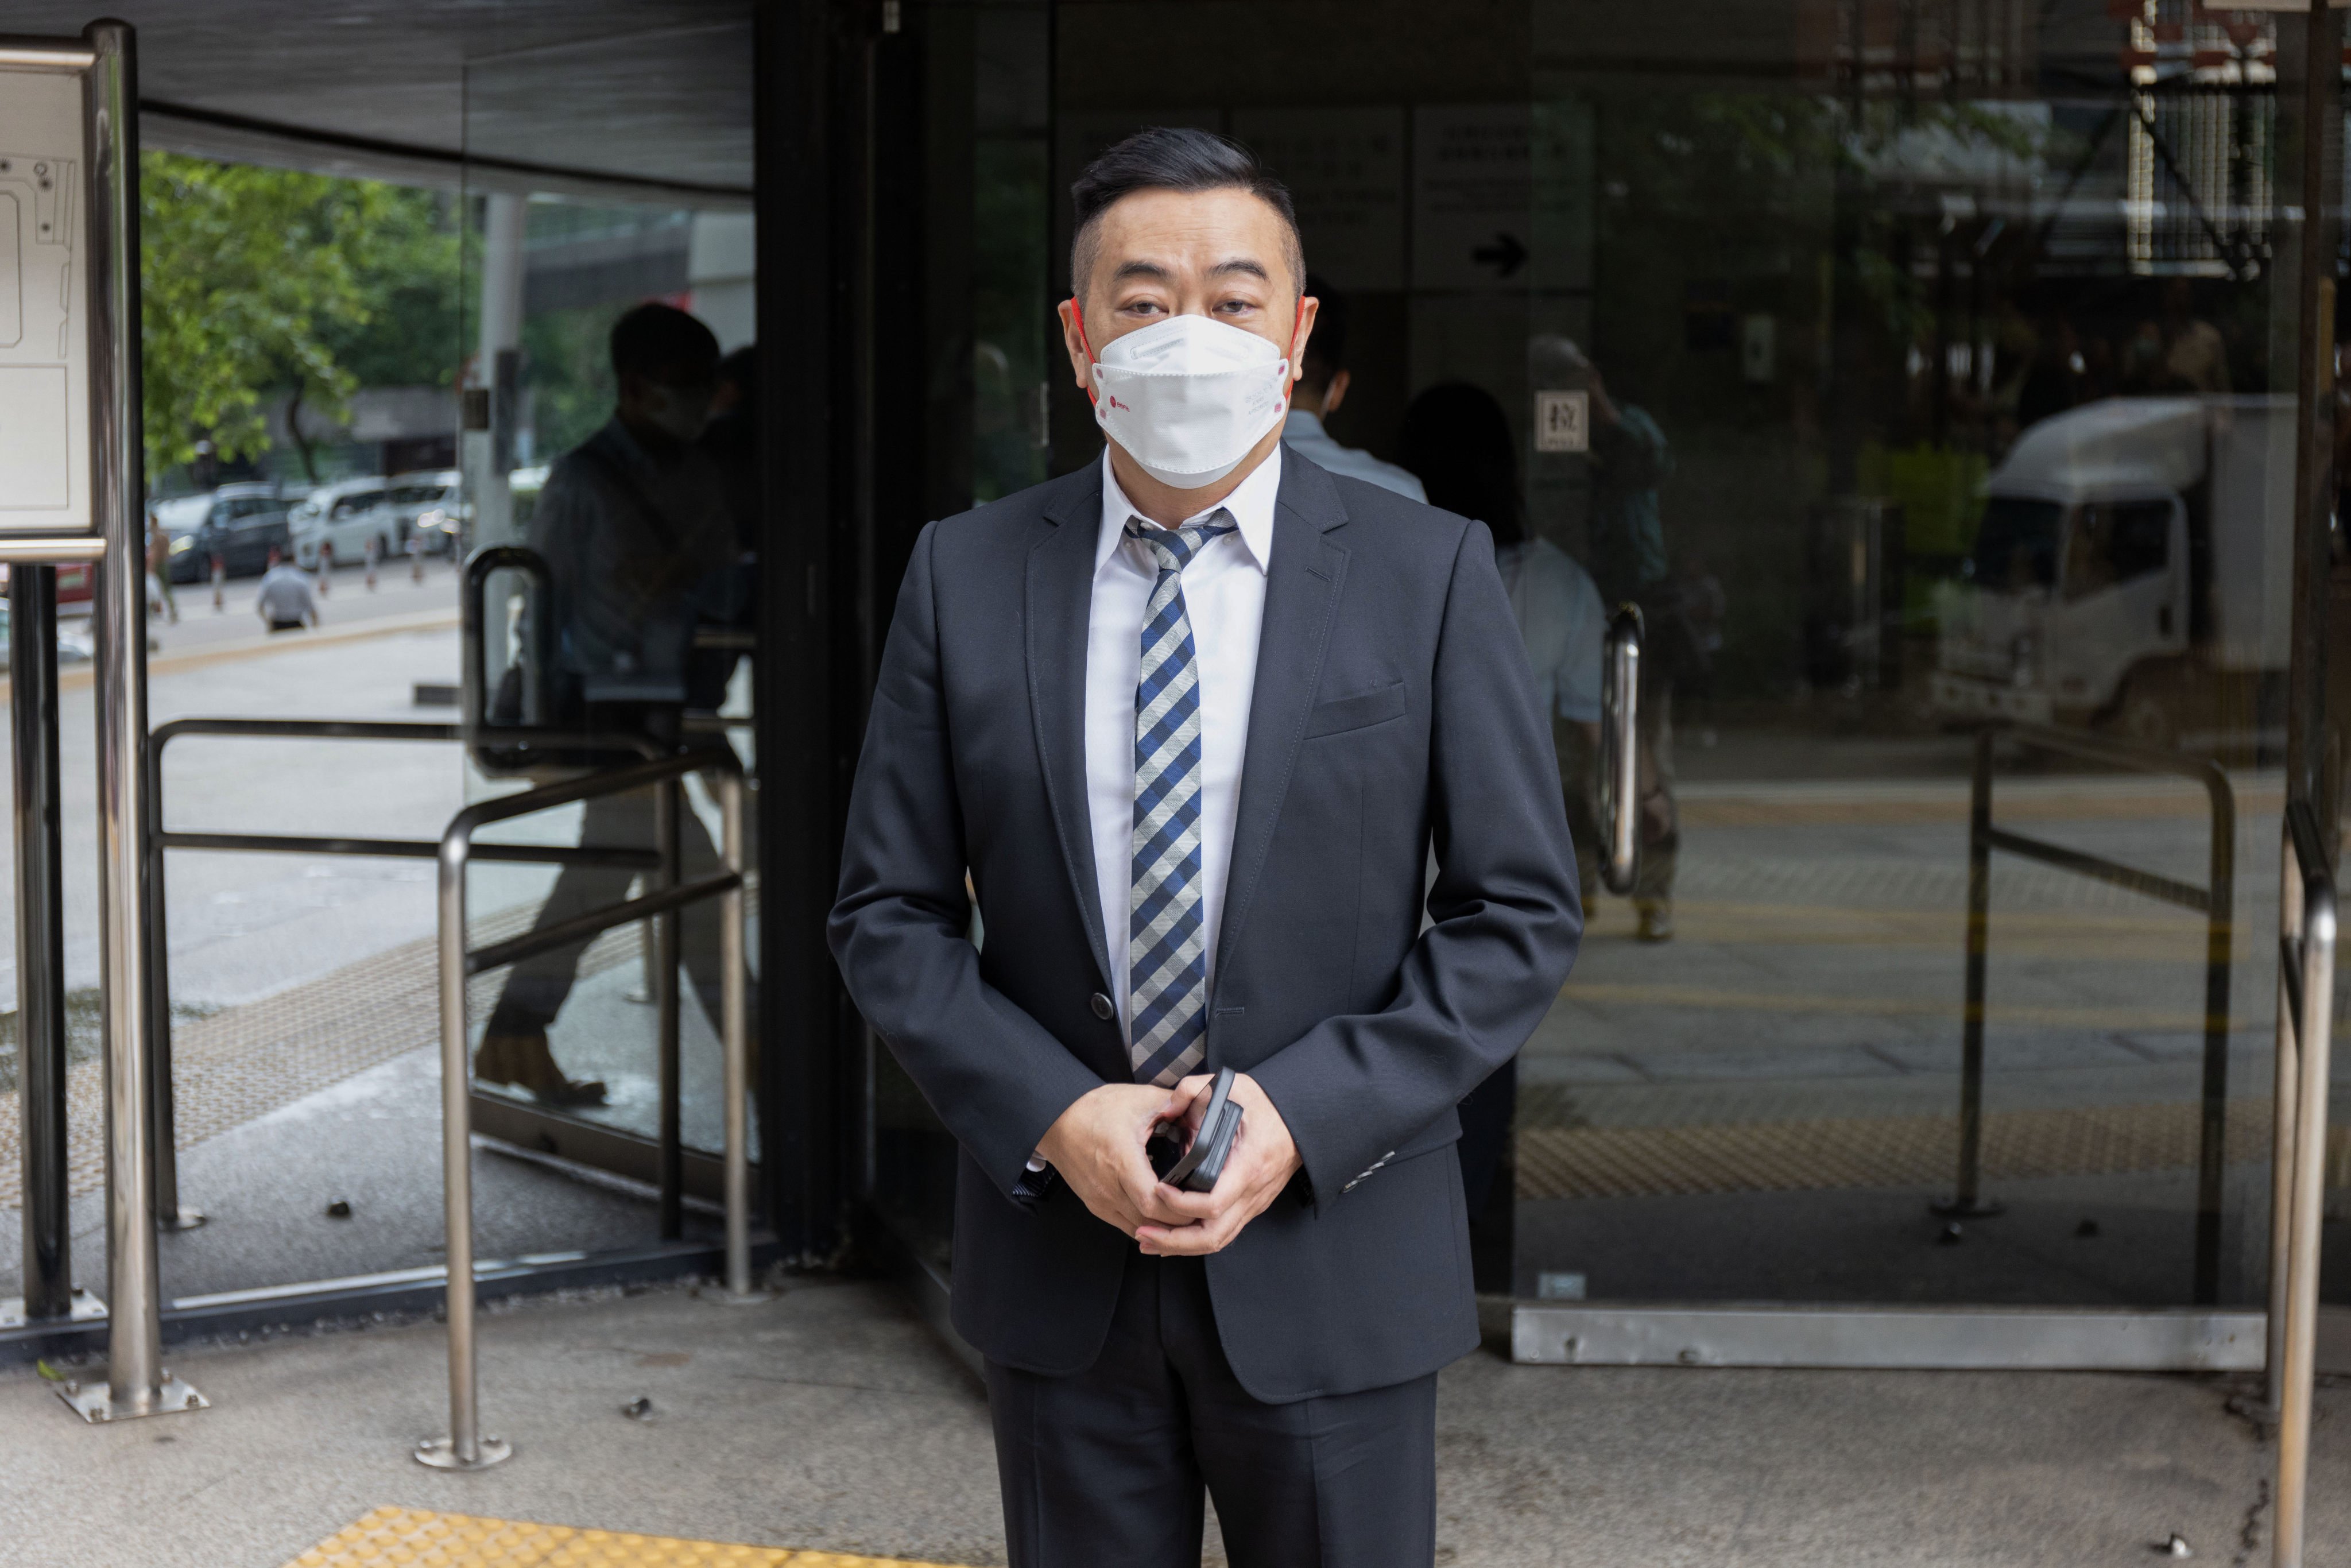 Superintendent Harbour Chan outside court last year. The mortgages were for a luxury house at Seaview Villas in Tai Po and a flat at Coastal Skyline in Tung Chung. Photo: Brian Wong